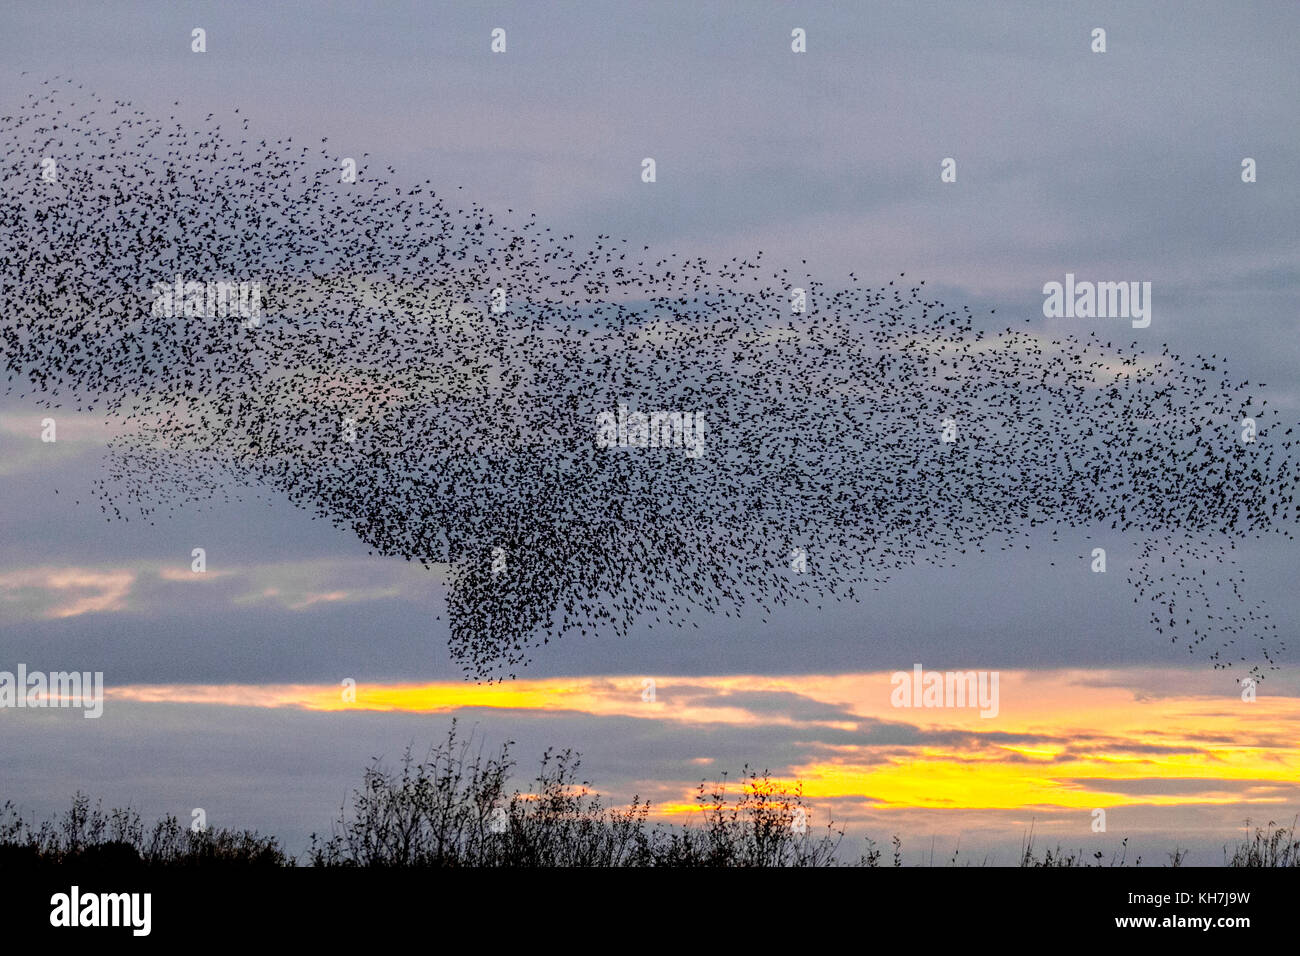 Burscough, Merseyside. 14th Nov, 2017. UK Weather. Spectacular Starling flocks mumurate over Martin Mere nature reserve at sunset as an estimated 50 thousand starlings gather at the onset of a cold winter, as the onset of dusk triggers this autumn gathering and groupings. The murmur or chatter, the interaction between the huge numbers as they fly, is quite intense and is thought to form part of a communication of sorts. These huge flocks are the largest seen in the last for 12 years and are attracting large numbers of birdwatchers to the area. Credit. MediaWorldImages/AlamyLiveNews Stock Photo